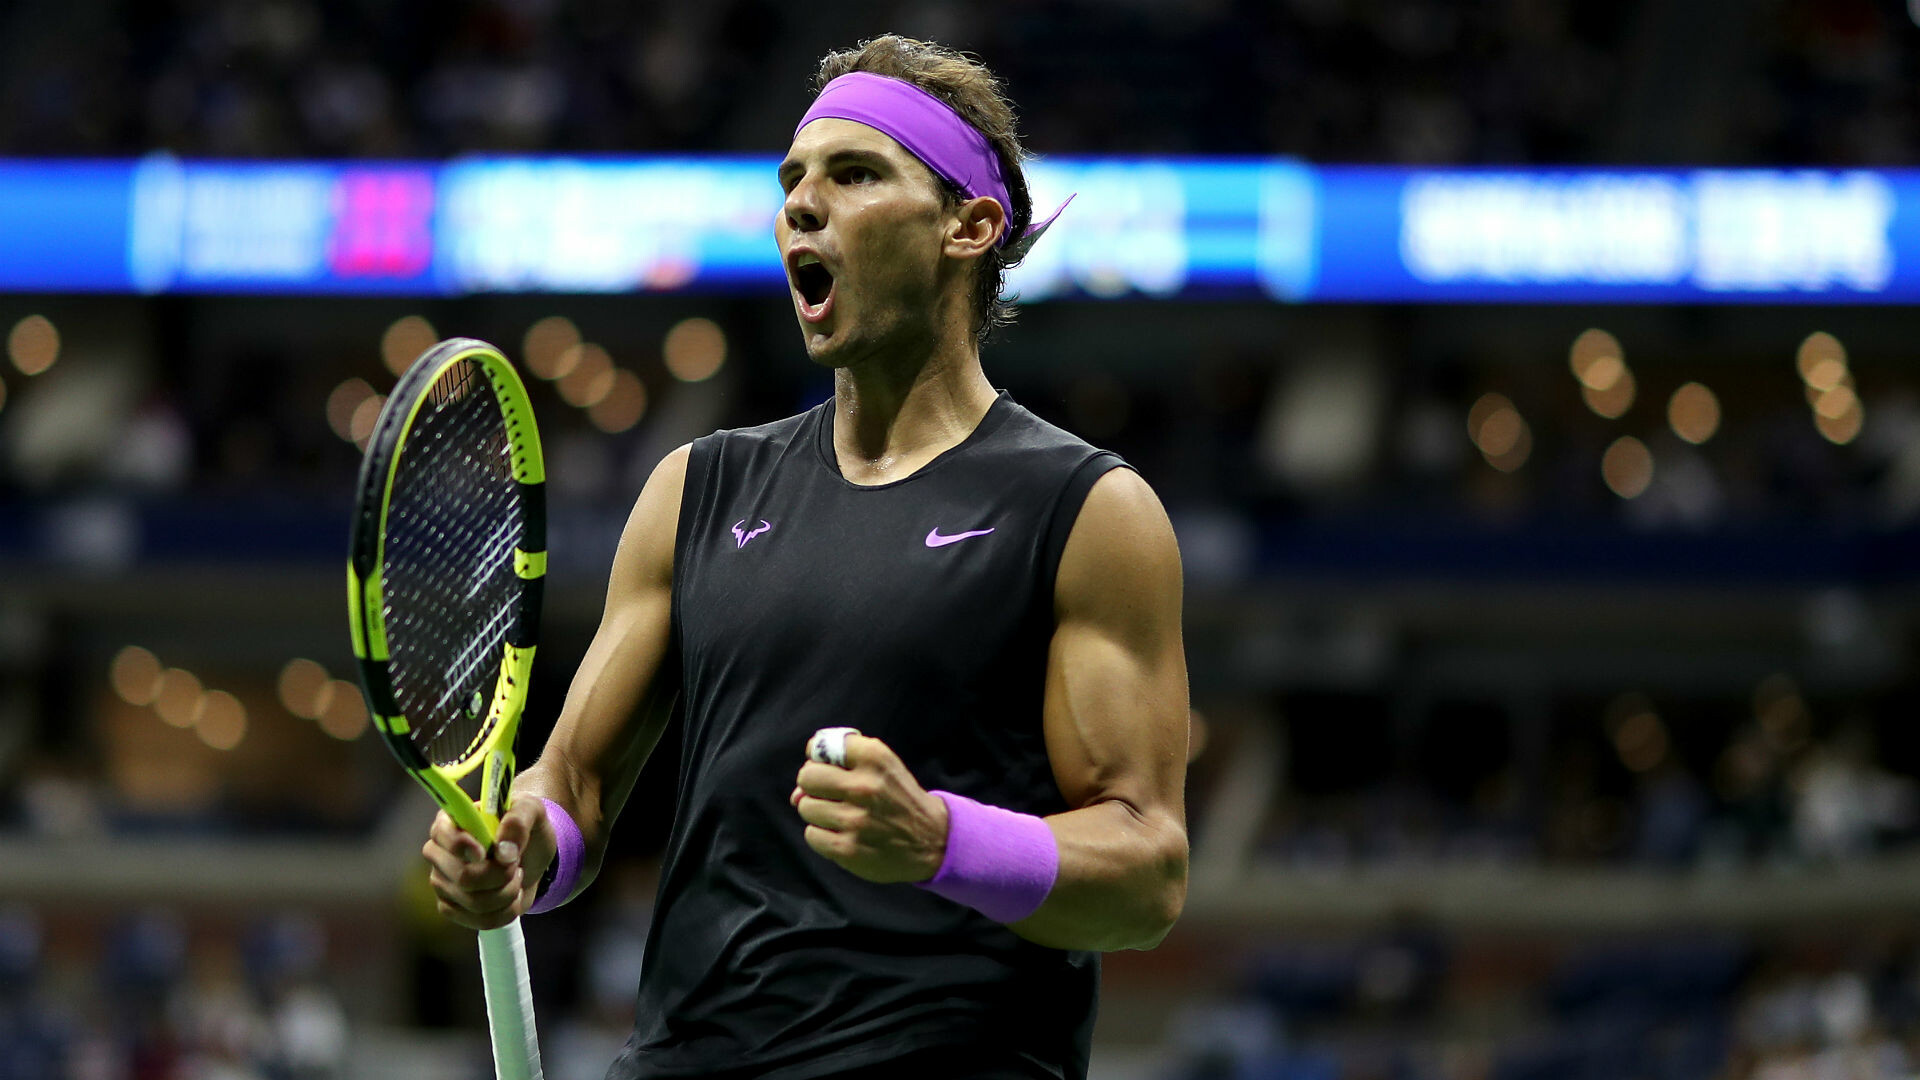 Rafael Nadal: Us Open, He won his second Rogers Cup title in Toronto in 2008. 1920x1080 Full HD Wallpaper.